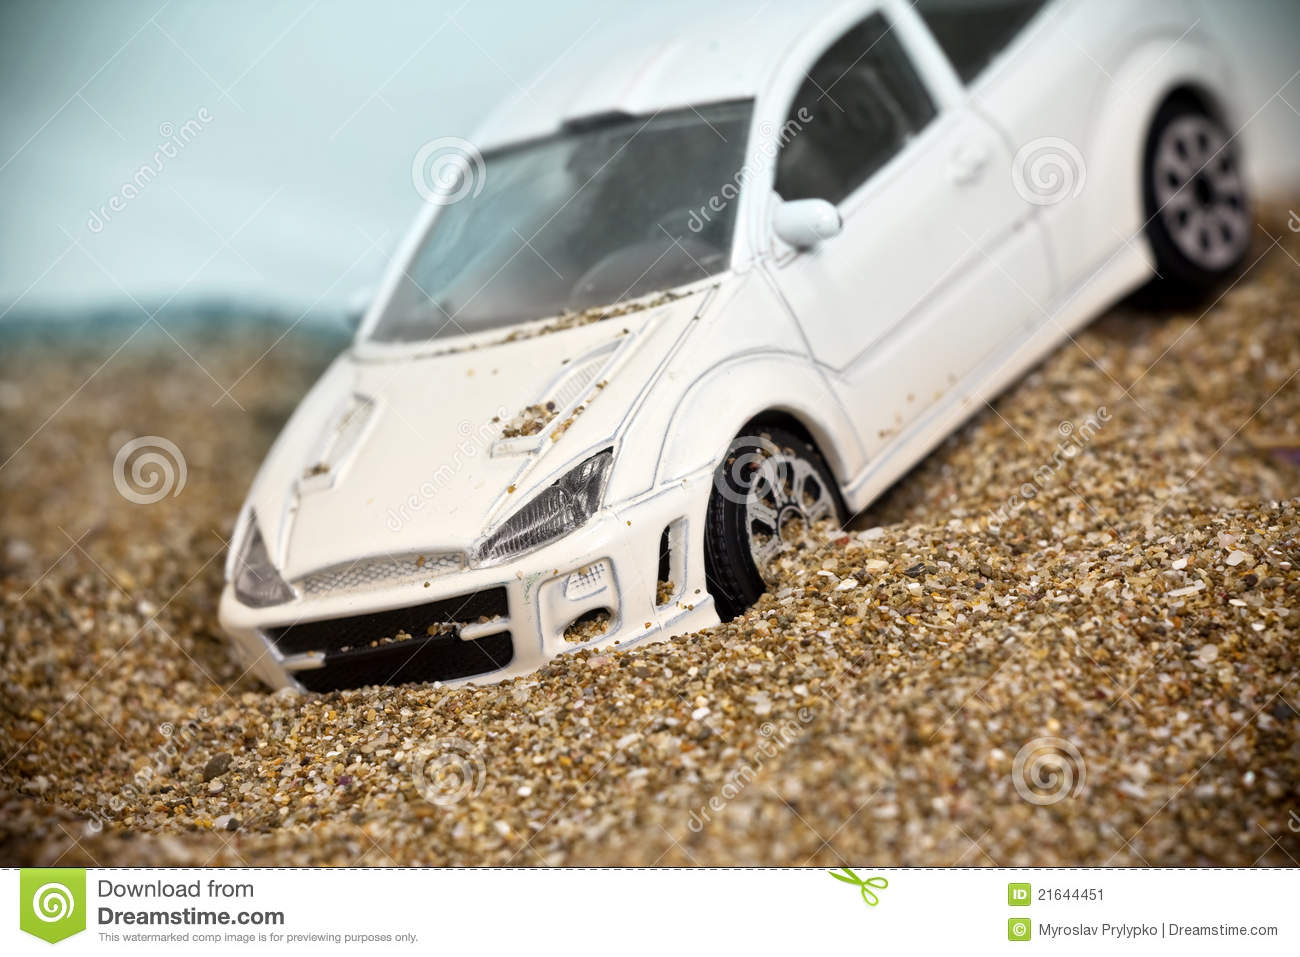 Toy Racing Car Crashed Into A Sand Dune And Slips Stock Image   Image